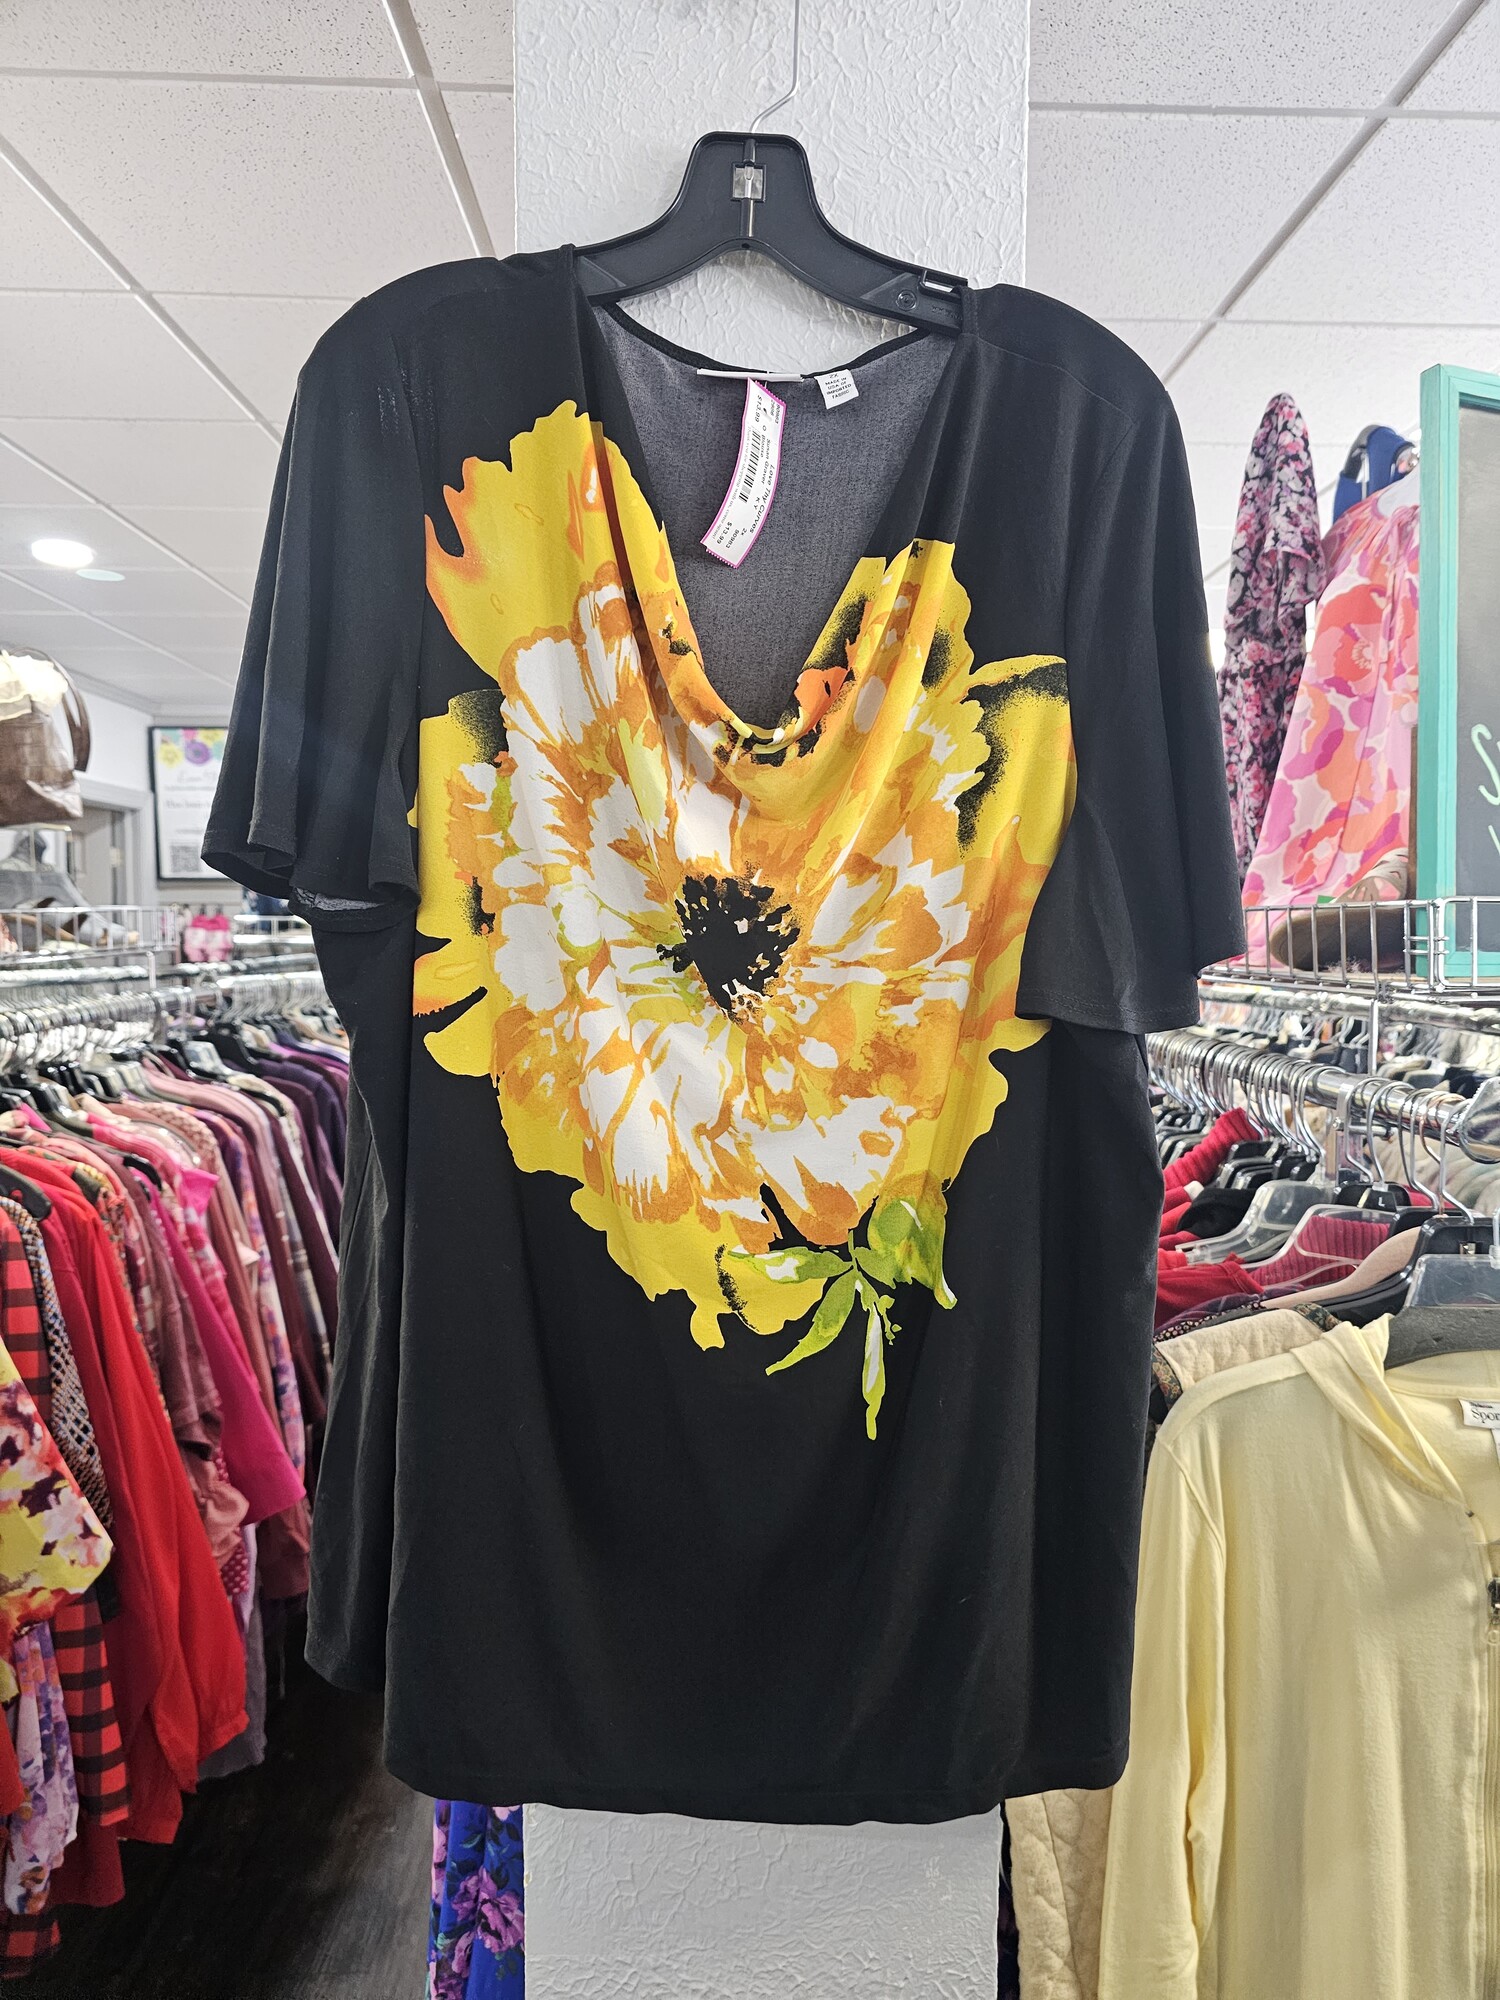 I am a sucker for a bold printed top! This one is sure to please with short sleeves and a beautiful yellow and gold floral graphic